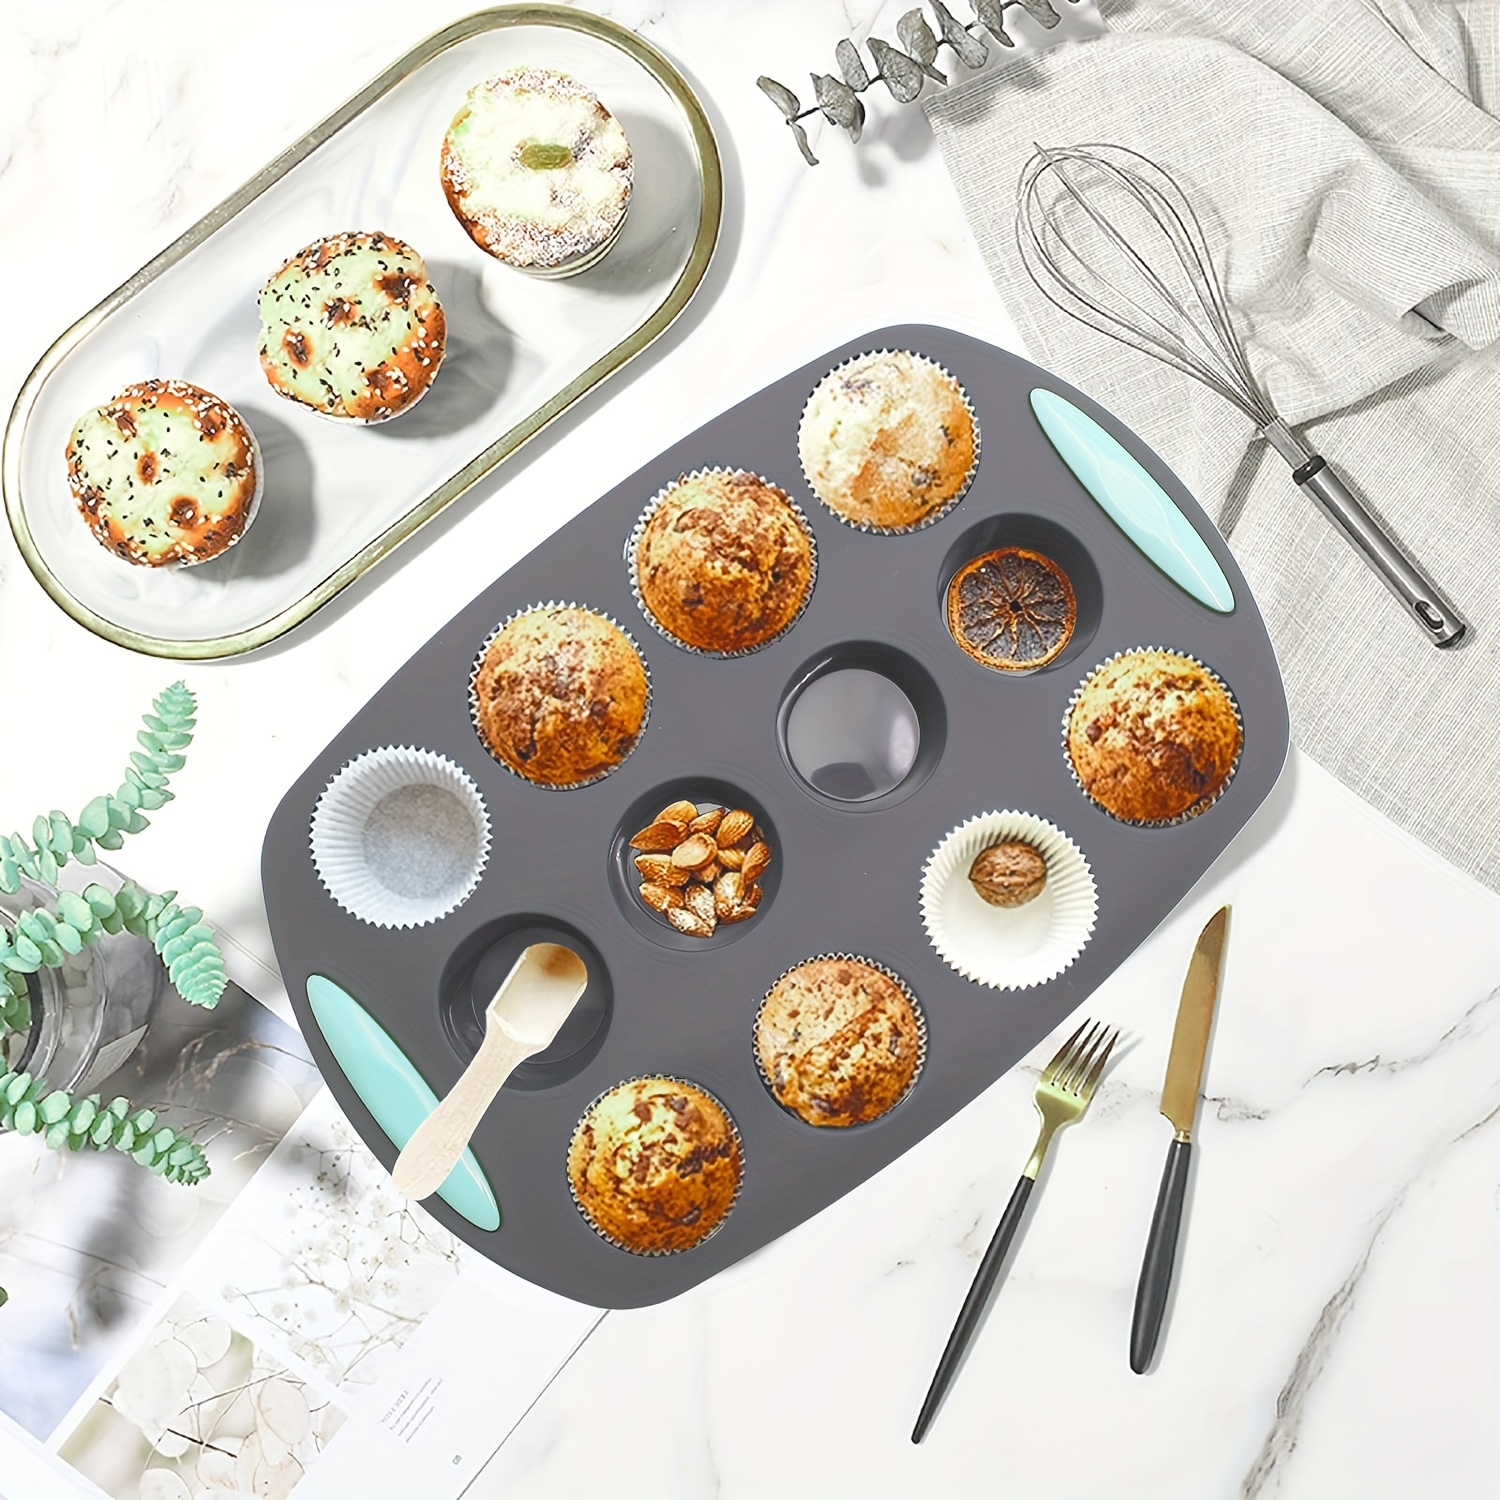 Silicone Muffin Pan Mini Cupcake Maker 6 And 12 Cups Baking Mold For  Homemade Qukiches Frittatas Muffins Tray Tin Bakeware Tools